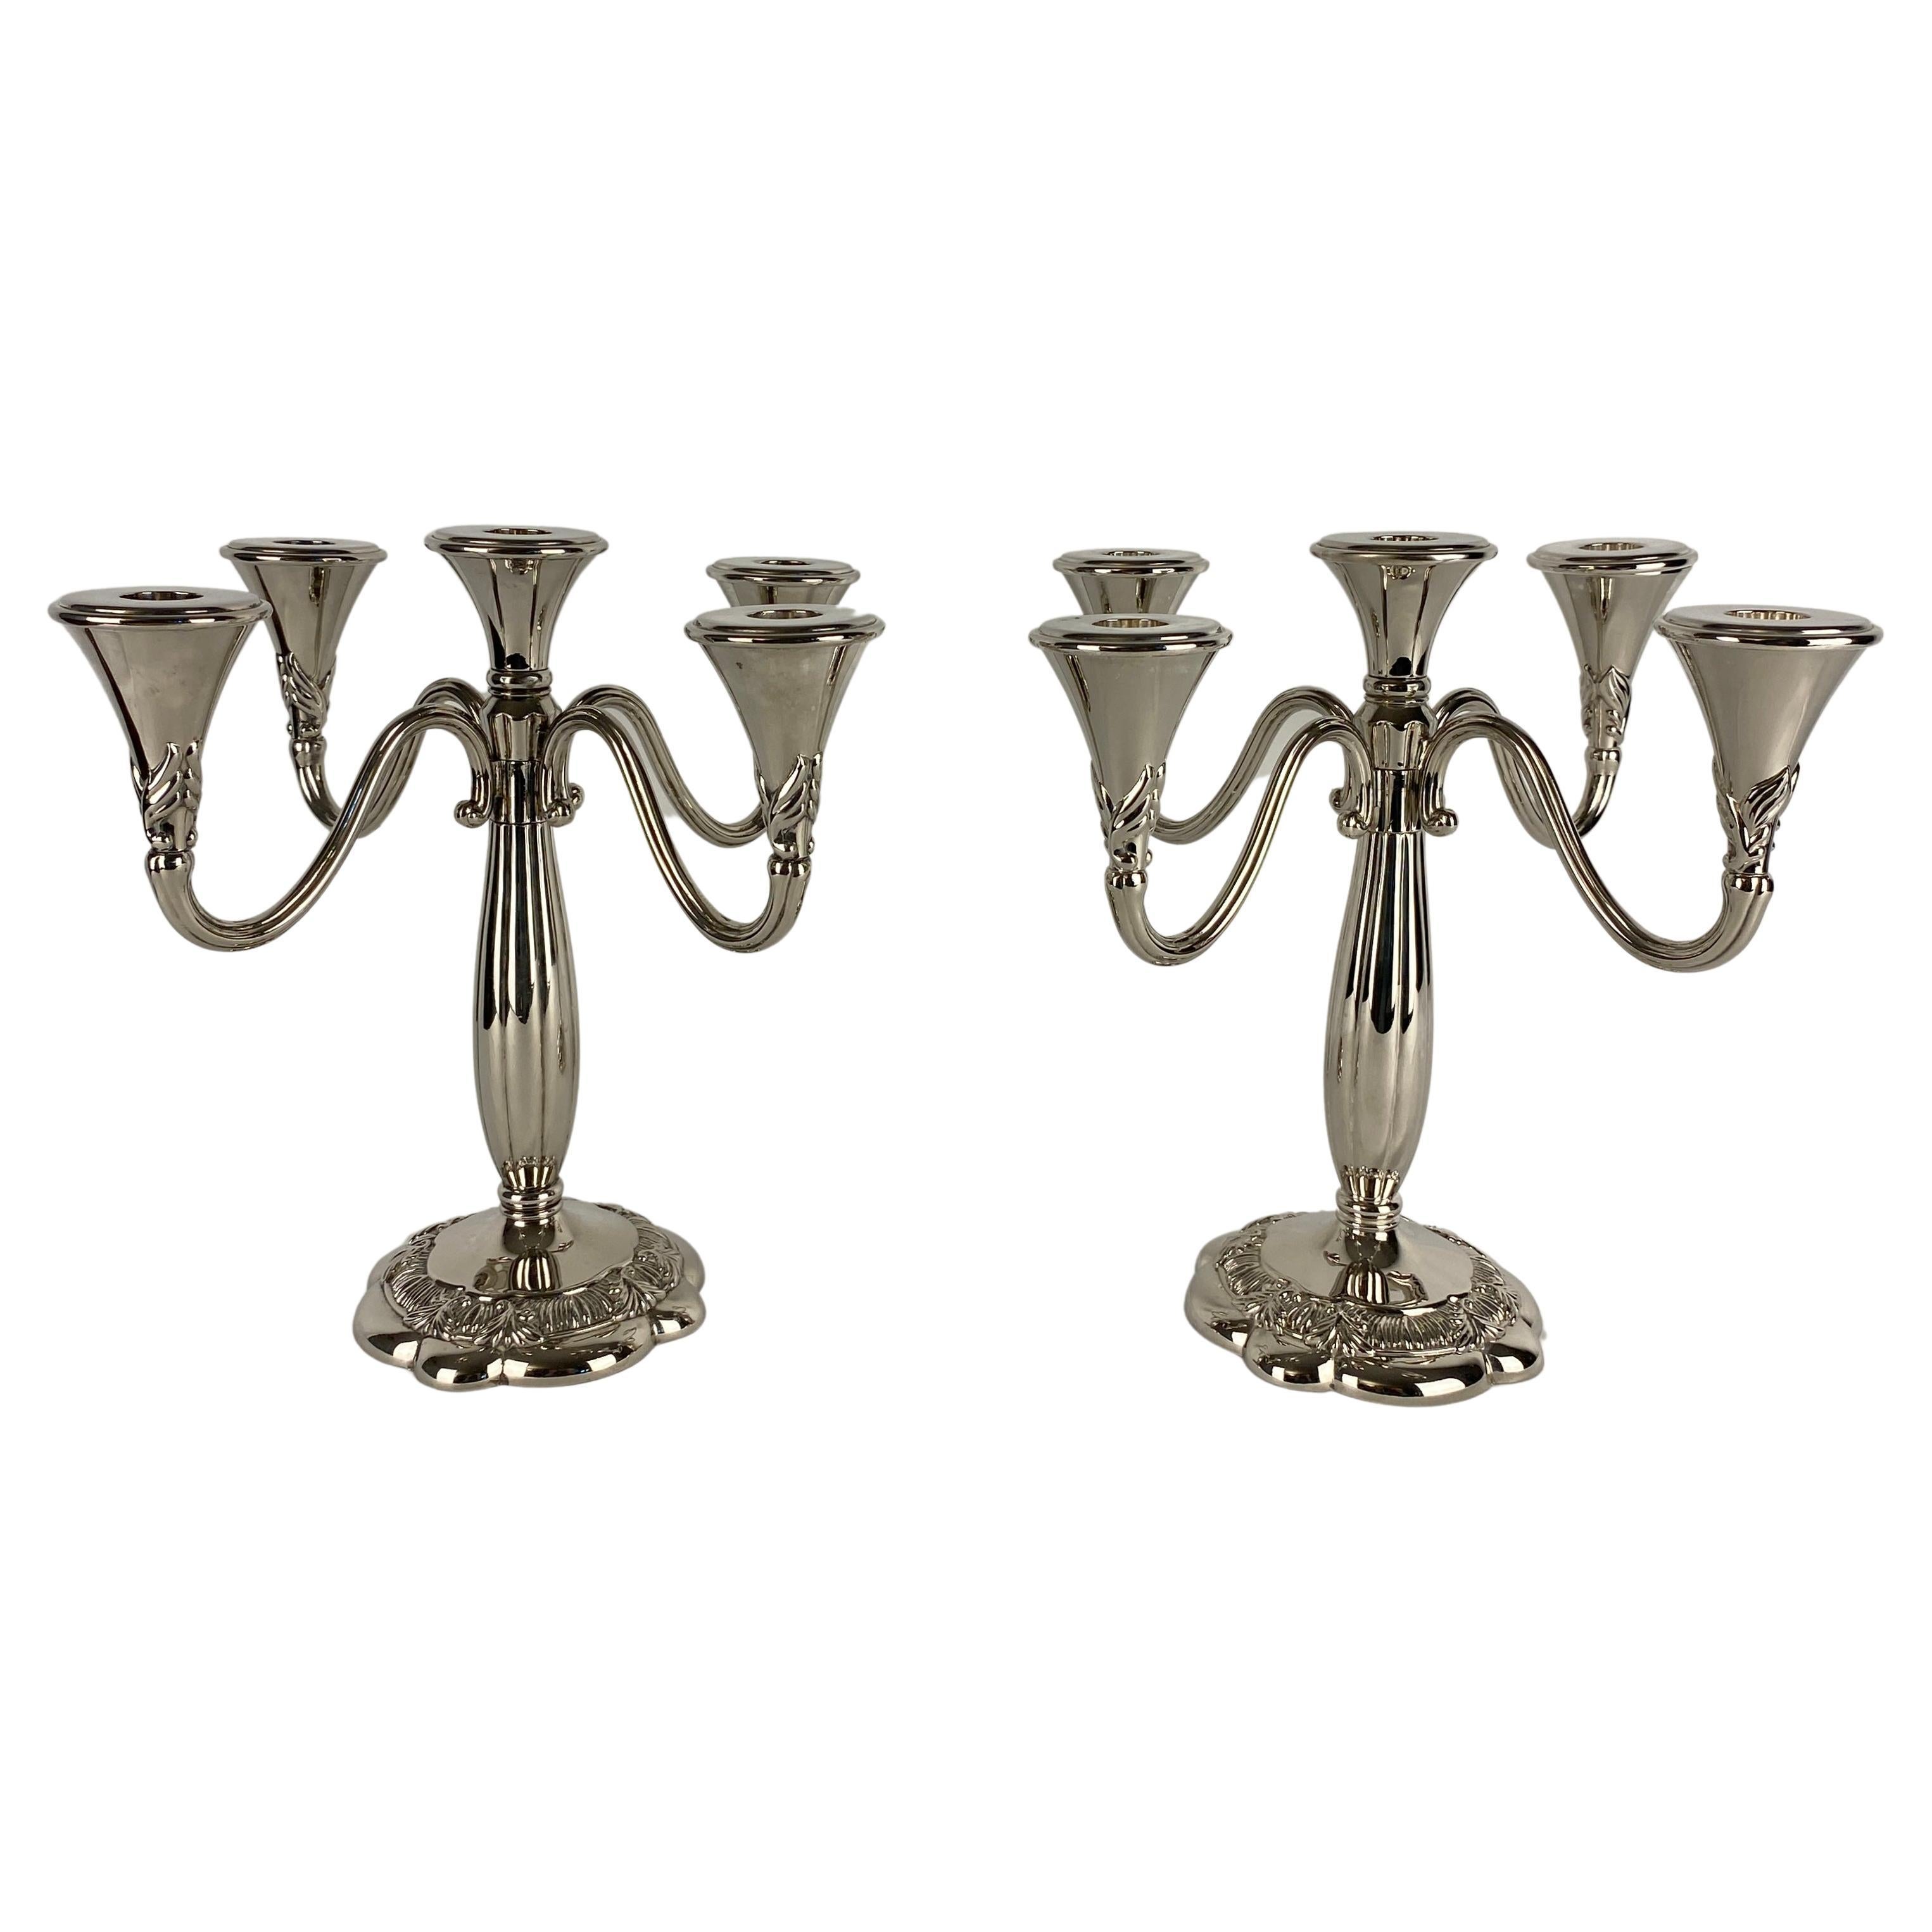 A handsome pair of Art Deco style 5 arm candelabras. 

This fine pair of Royal Gallery Vintage Post Modern Candle Holders are of very good quality. 
Round bases with Art Deco form.
Bears the maker's mark. 

Very good condition, minor surface